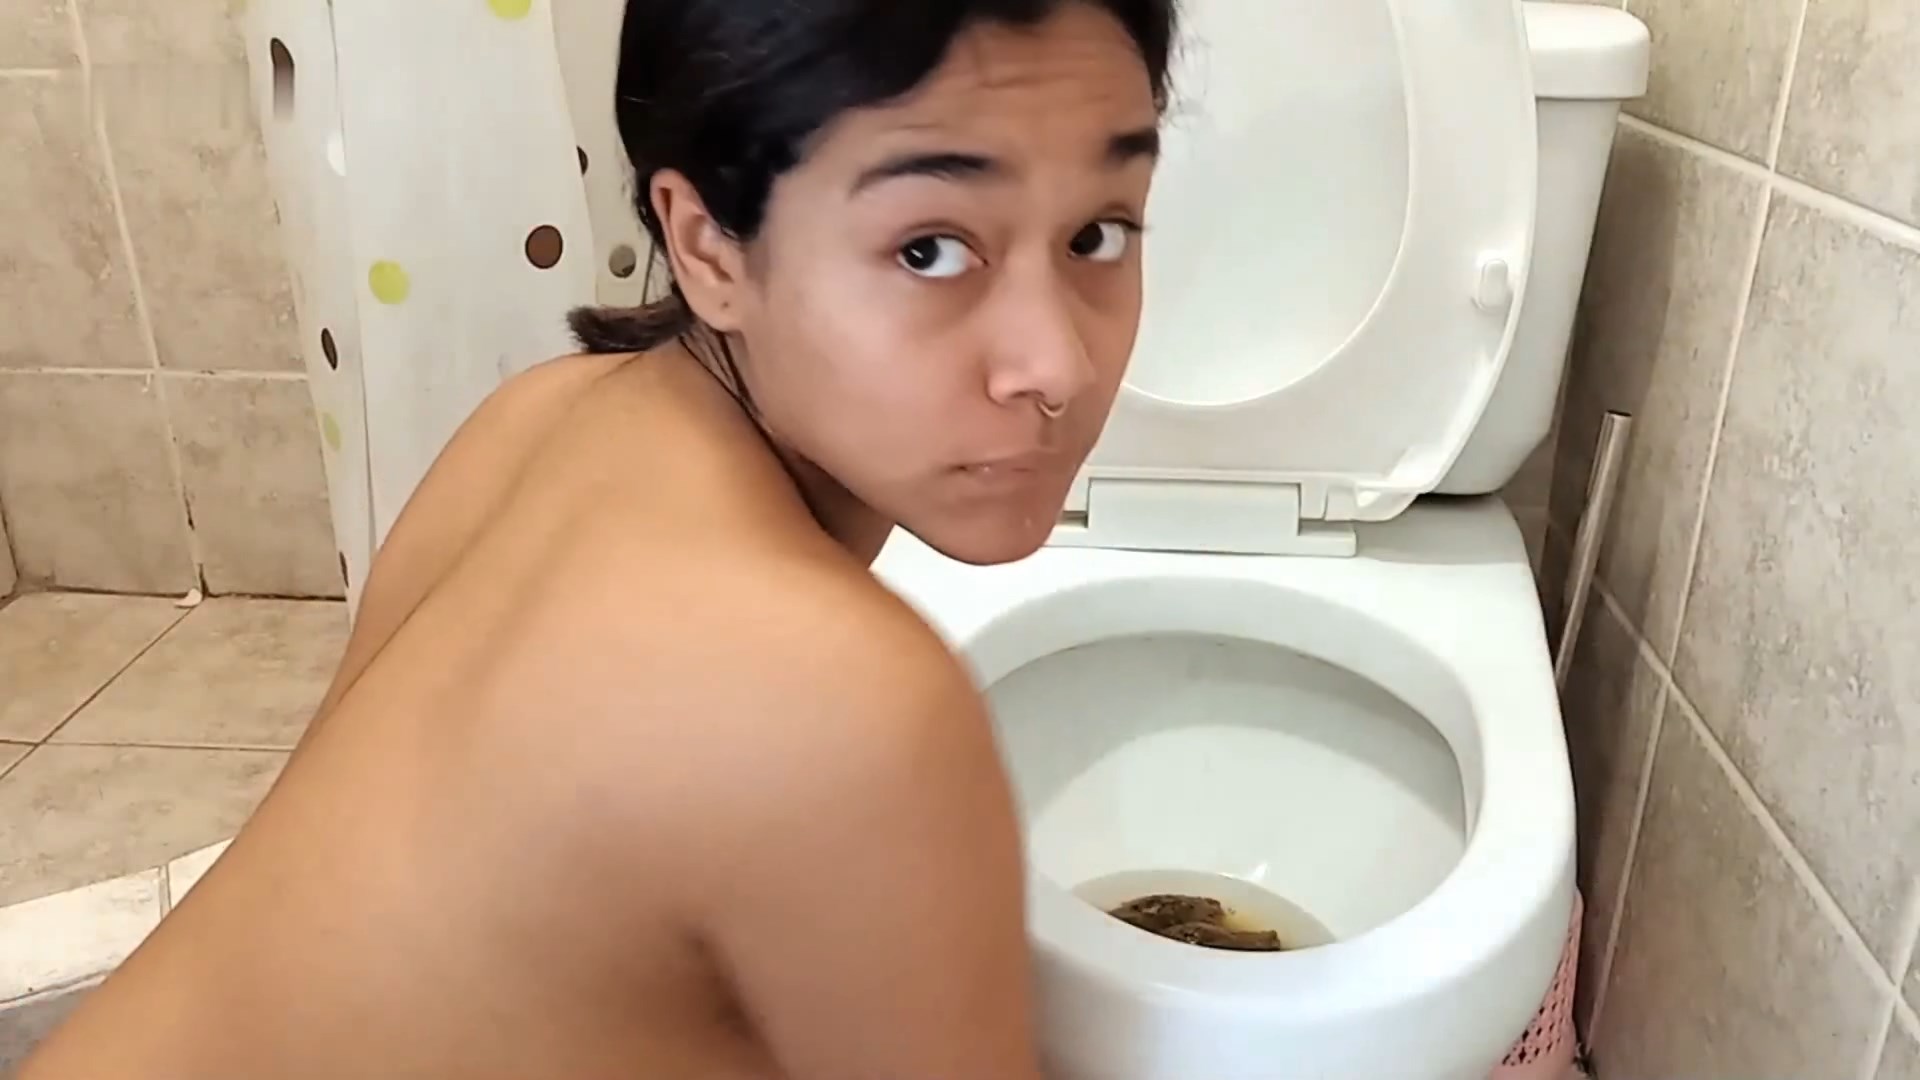 1920px x 1080px - Eating my dirty toilet, after pooing (Special scat porn request from our  premium user) $28.99 by Mirellabb from 11 - Extreme Scat Porn Site #1